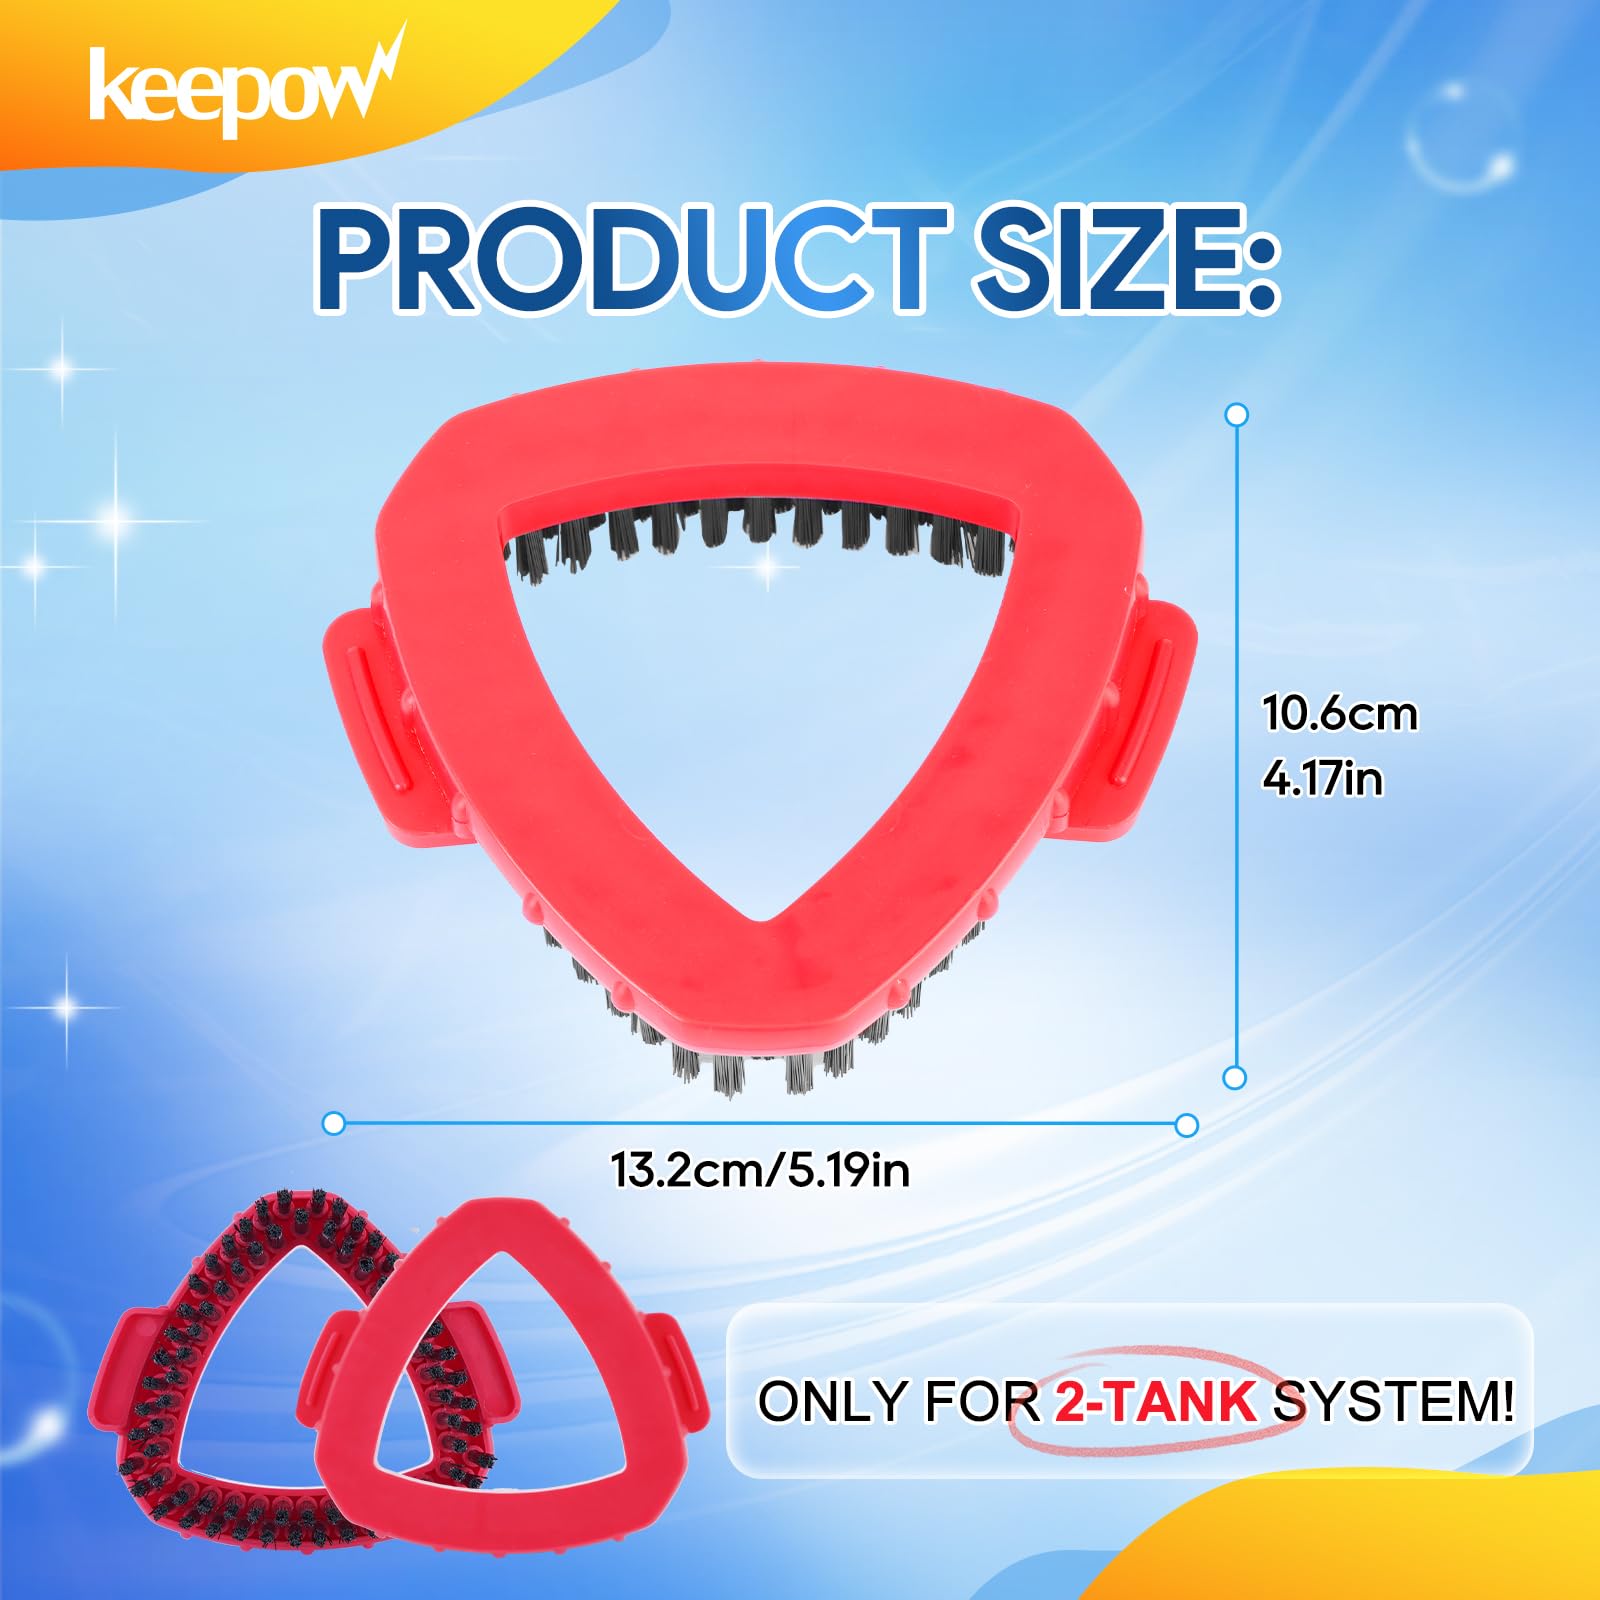 KEEPOW Spin Mop Replace Head Base Scrub Brush Compatible with O Ceda RinseClean 2 Tank System, Shower Floor Scrubber for Bathroom Kitchen Wall Tile Deck